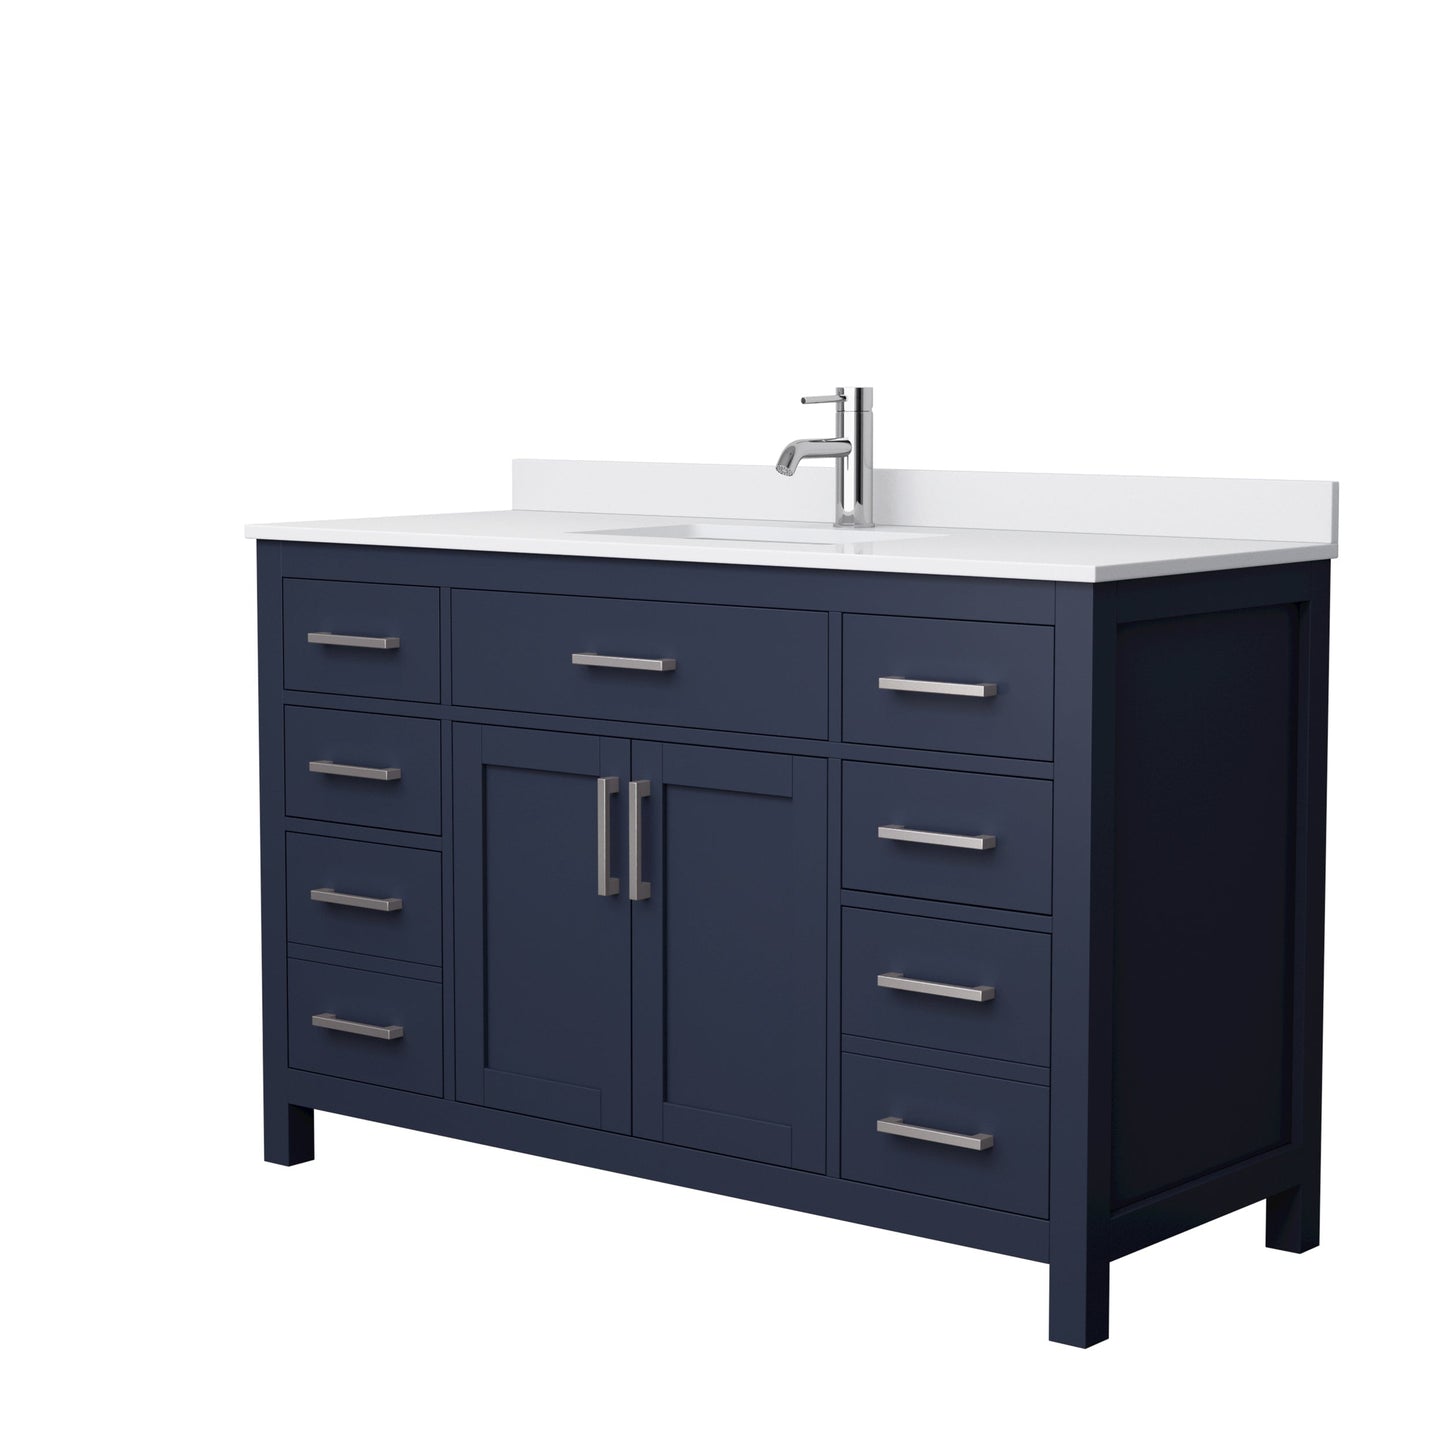 Wyndham Collection Beckett 54" Single Bathroom Dark Blue Vanity With White Cultured Marble Countertop, Undermount Square Sink And Brushed Nickel Trim